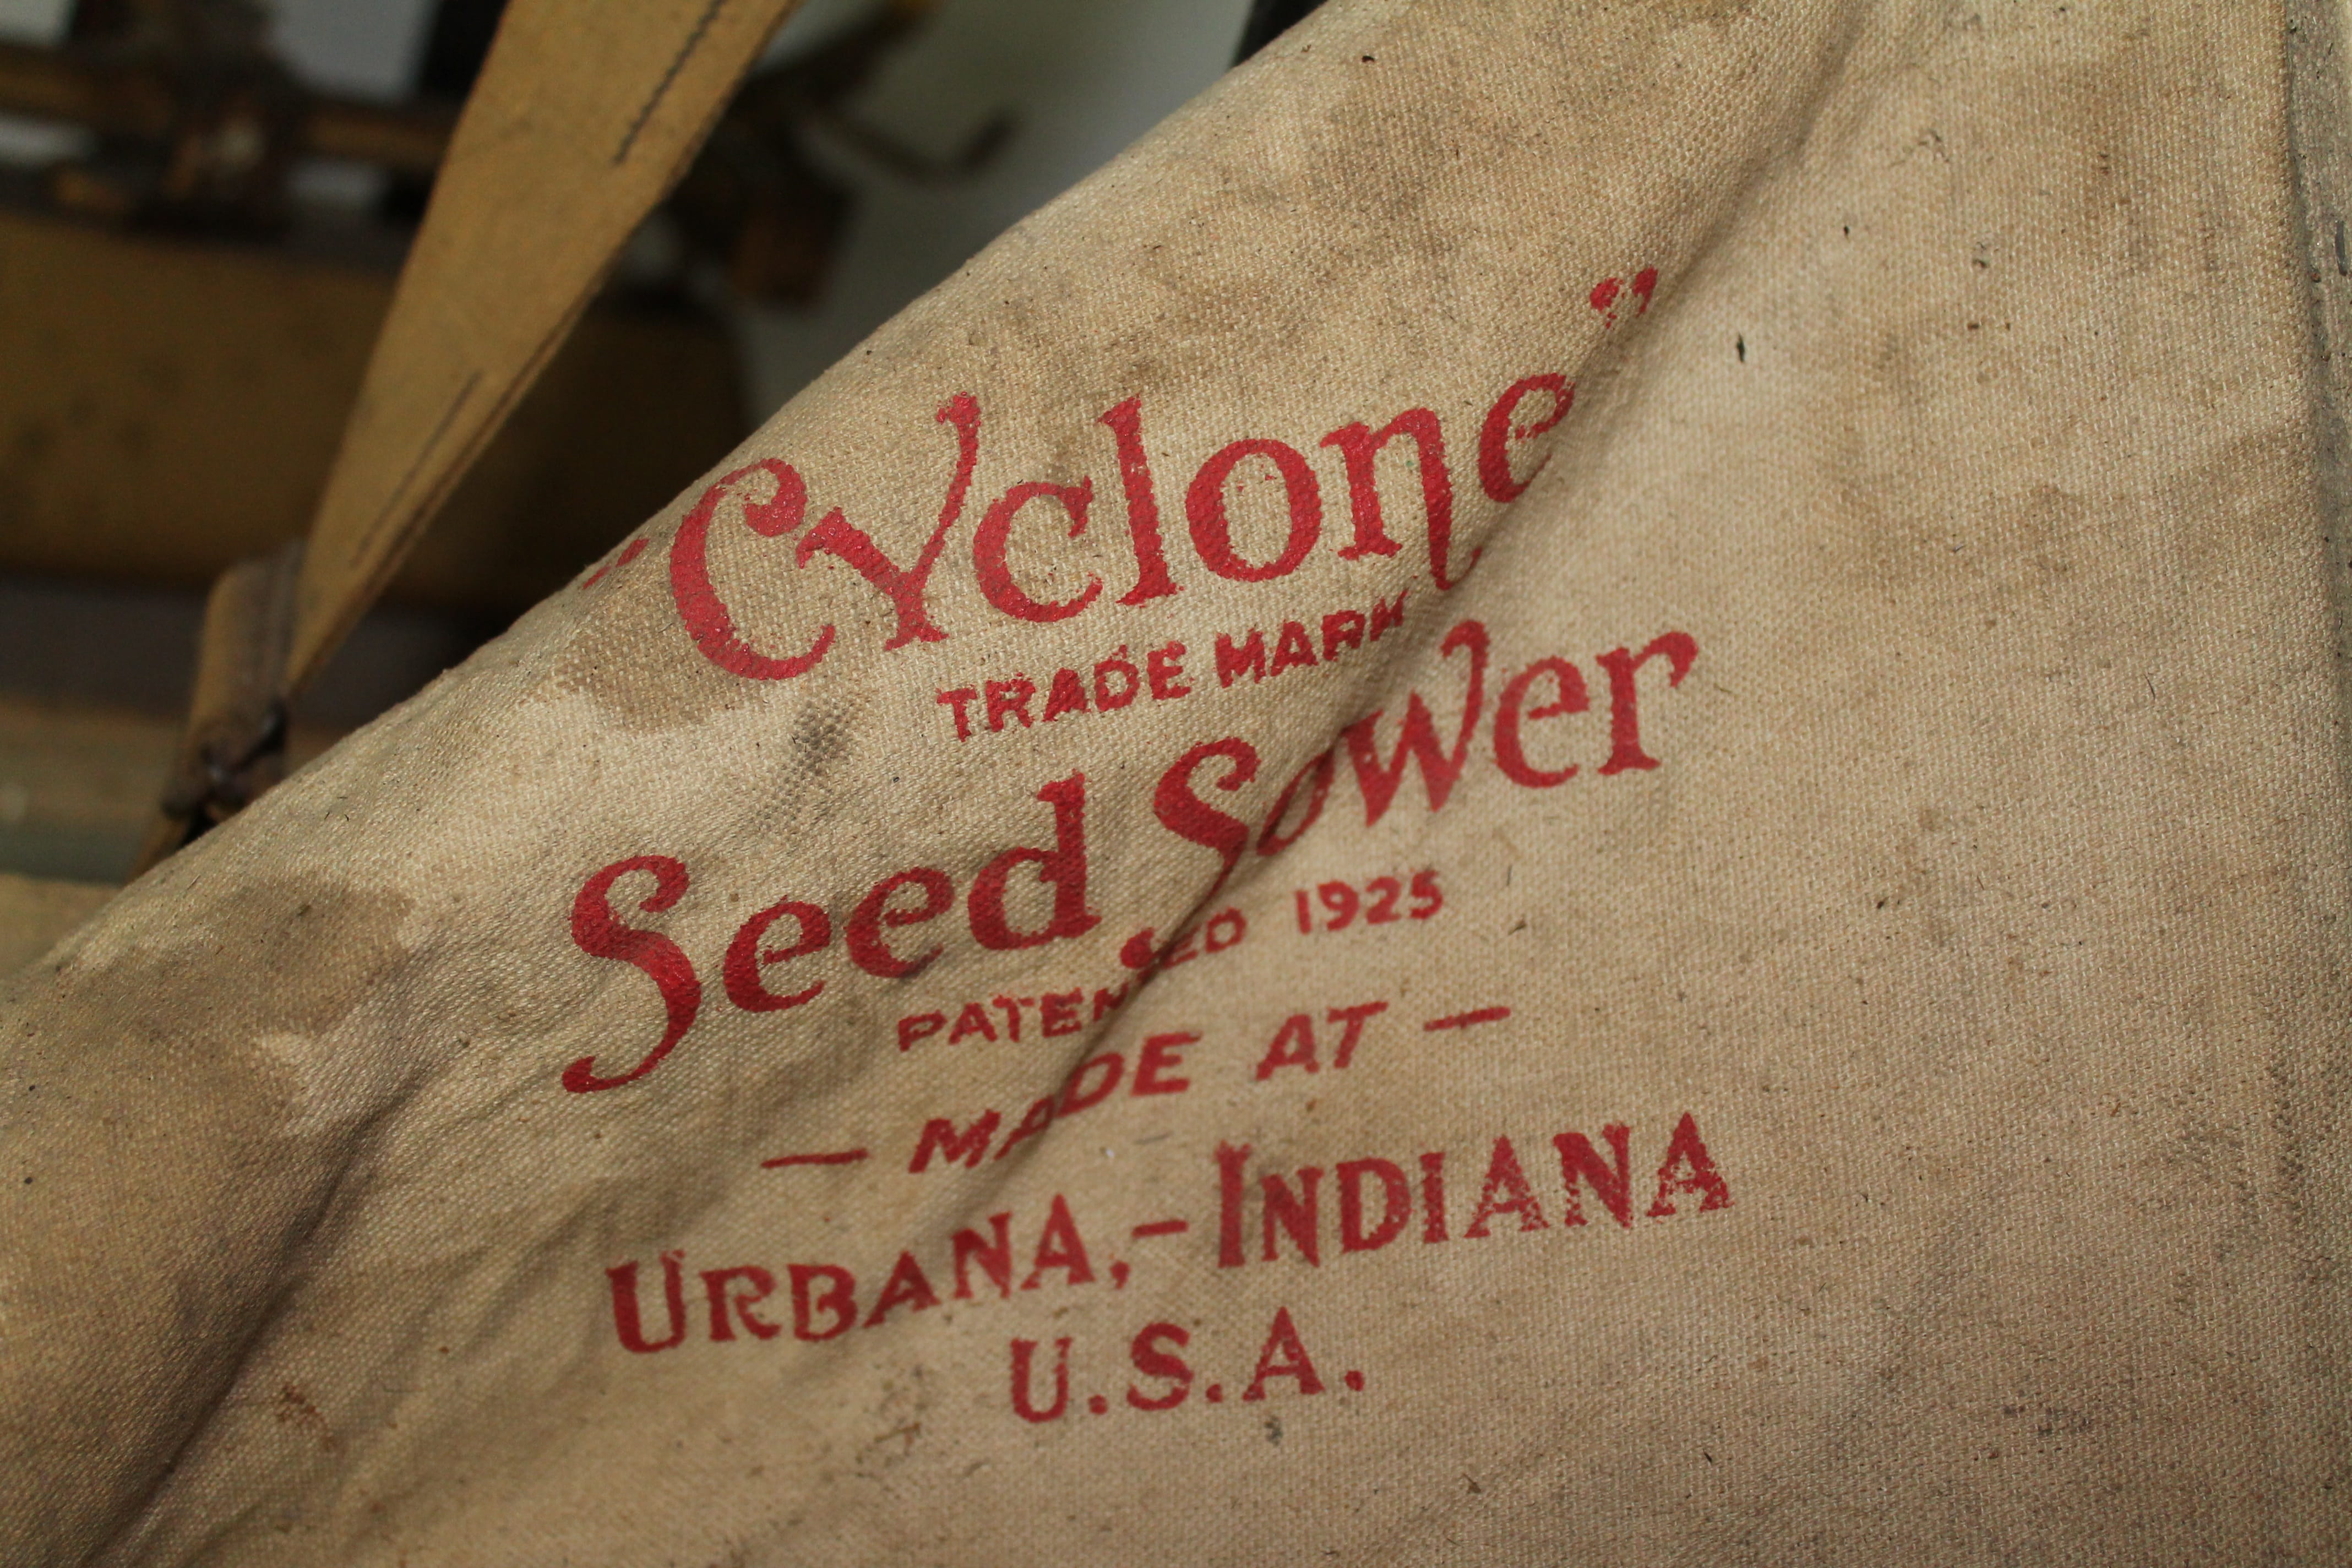 Antique, Farmer, Sowing, Seed, Sower, seed sower, cyclone, text